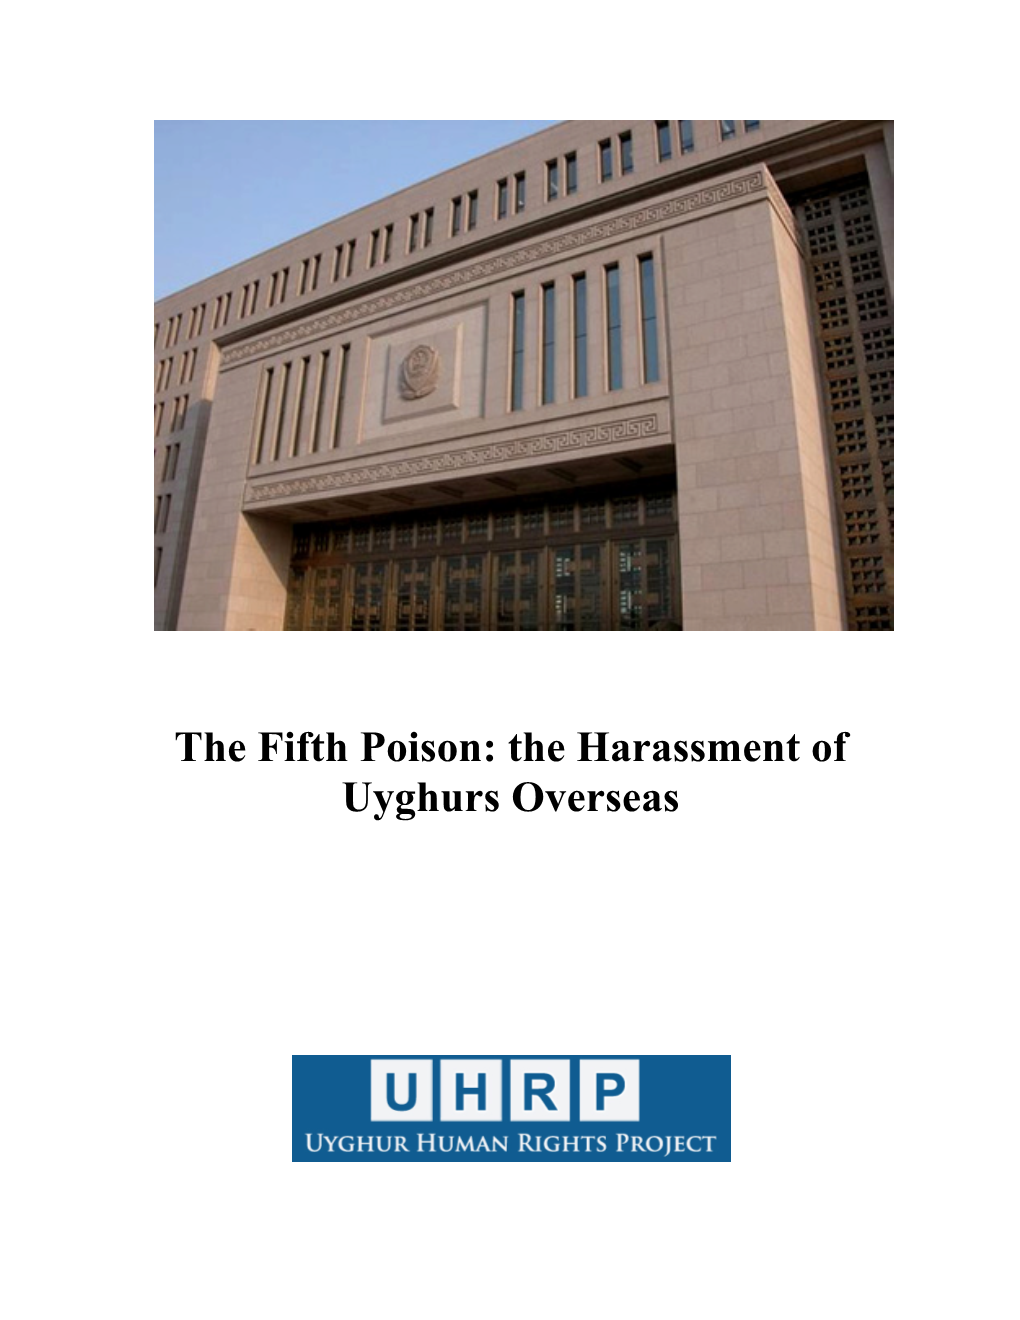 The Fifth Poison: China's Harassment of Uyghurs Overseas